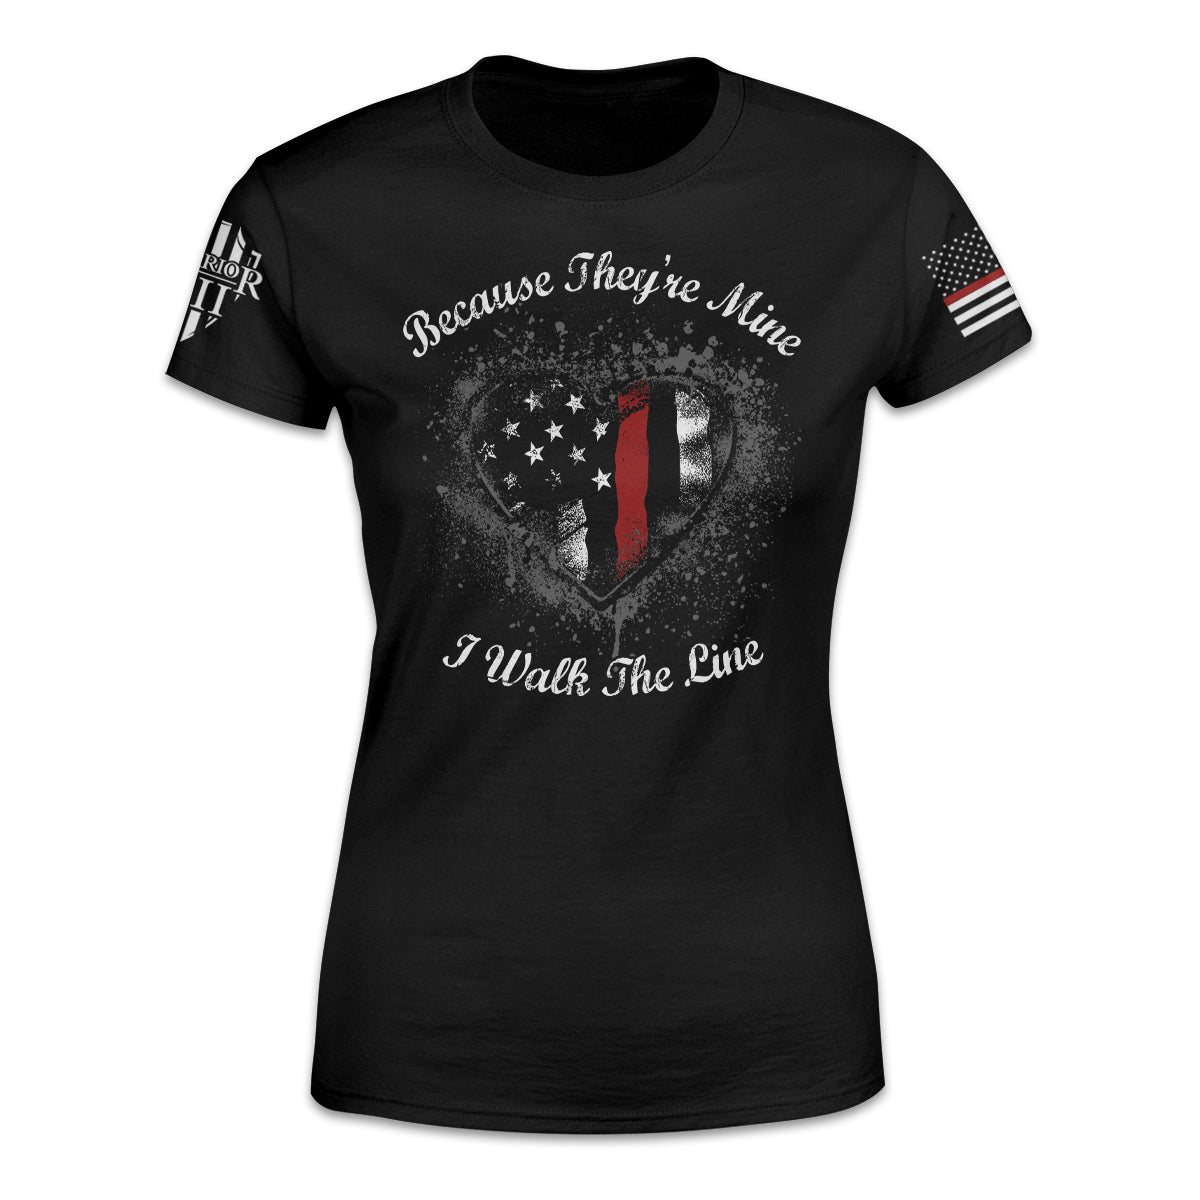 A black women's thin red line t-shirt with the words "Because they're mine I walk the line" printed on the front.